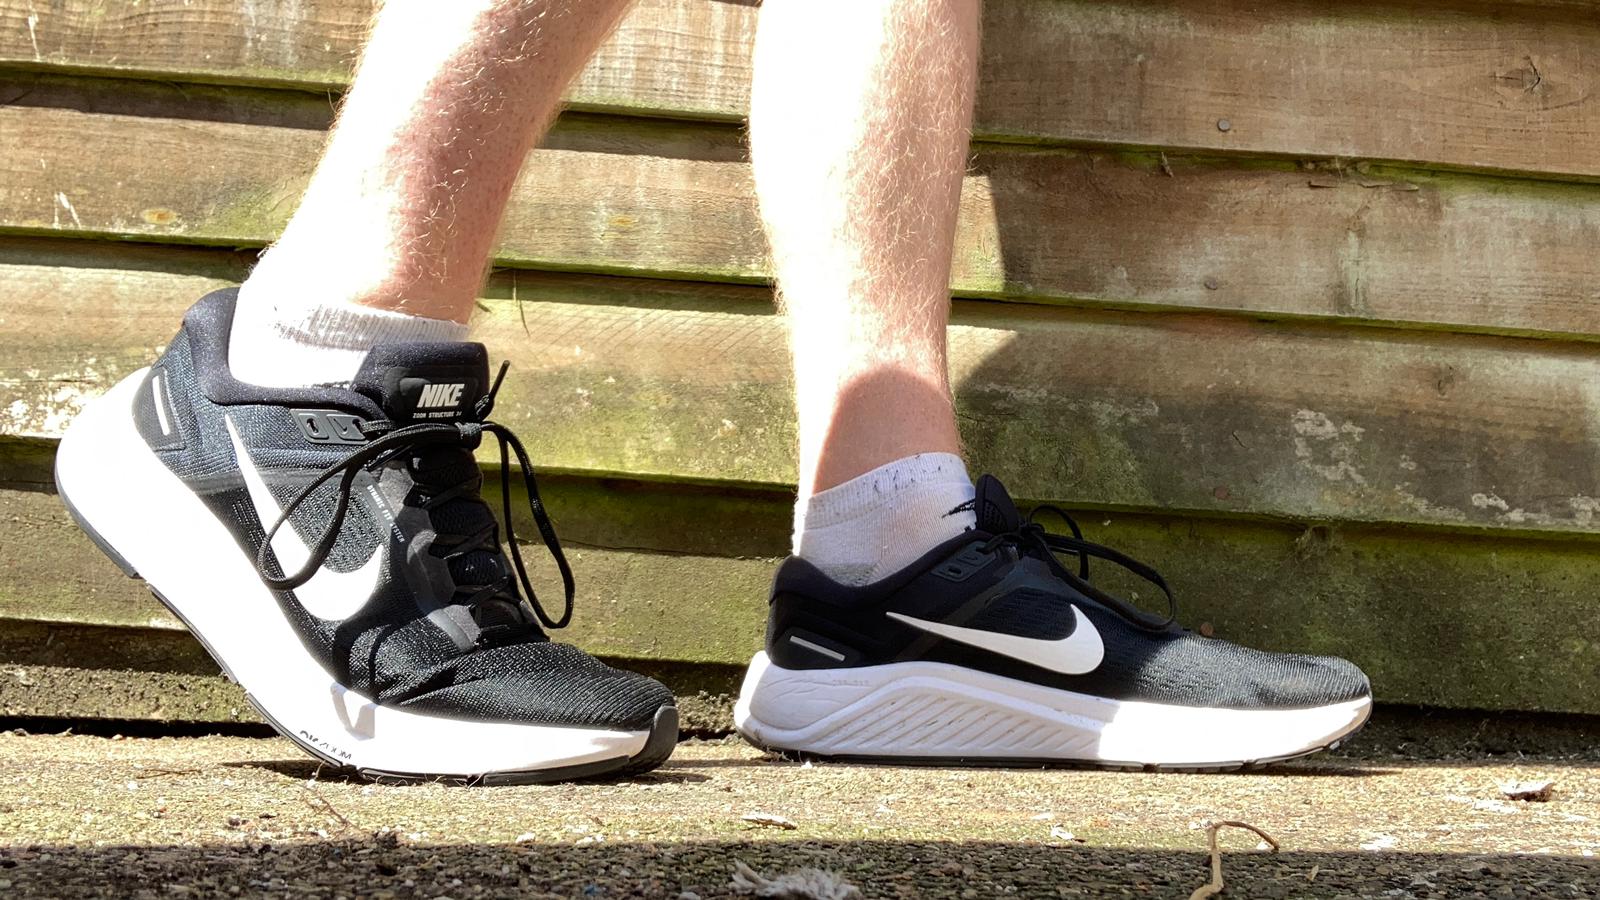 Nike Air Zoom Structure 24 being worn on street